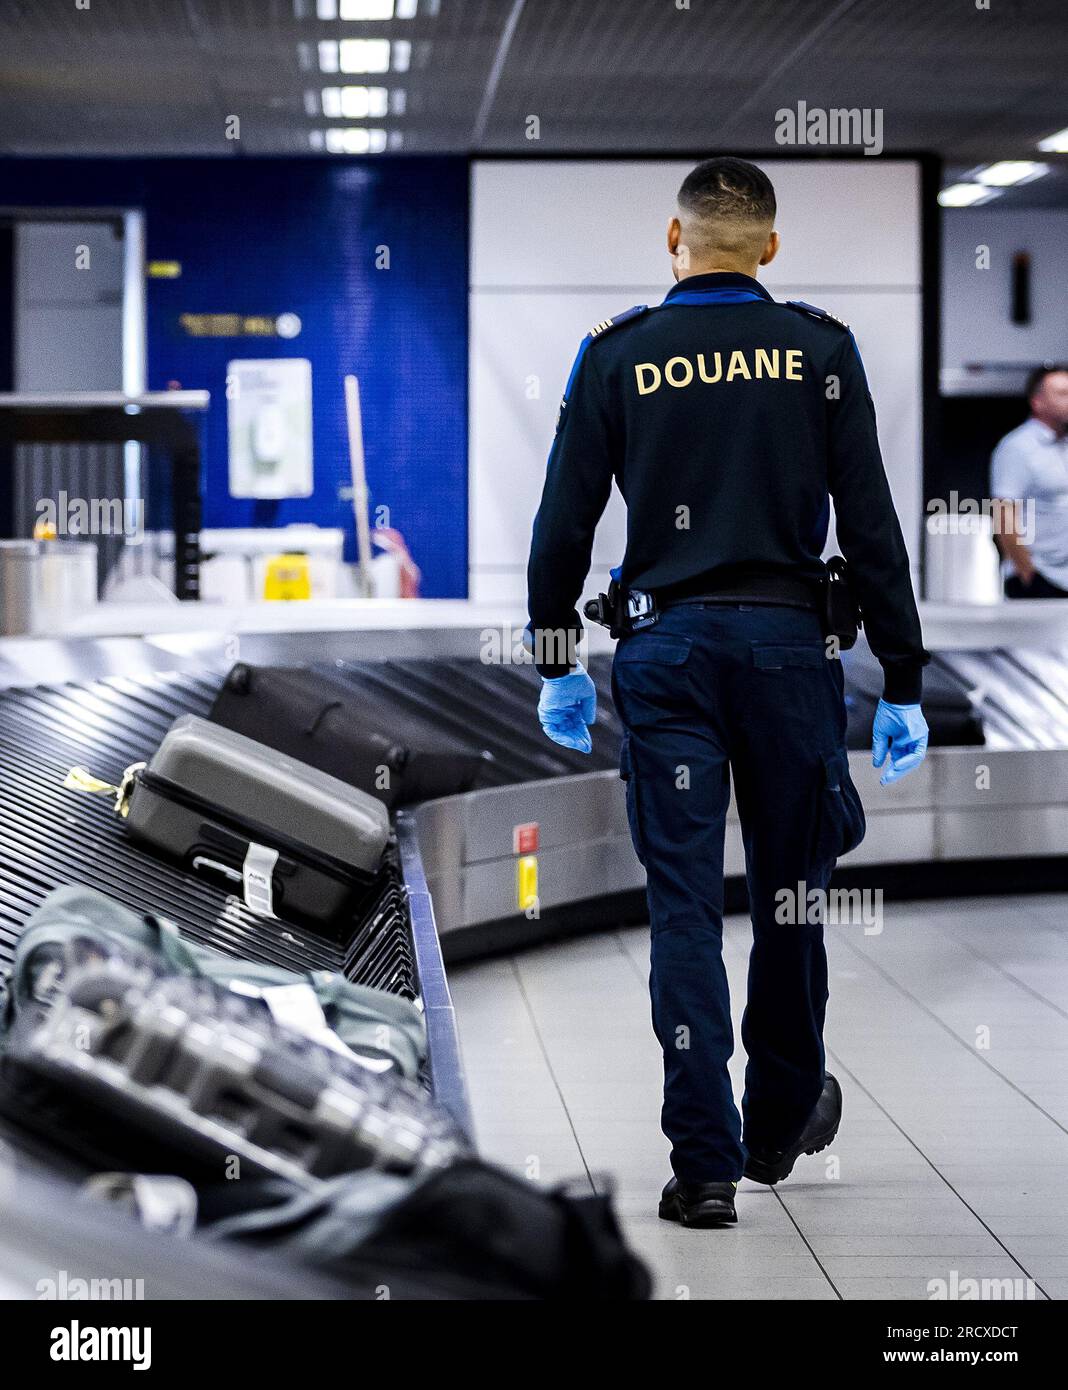 SCHIPHOL - A customs officer inspects a suitcase at Schiphol Airport. ANP  REMKO DE WAAL netherlands out - belgium out Stock Photo - Alamy